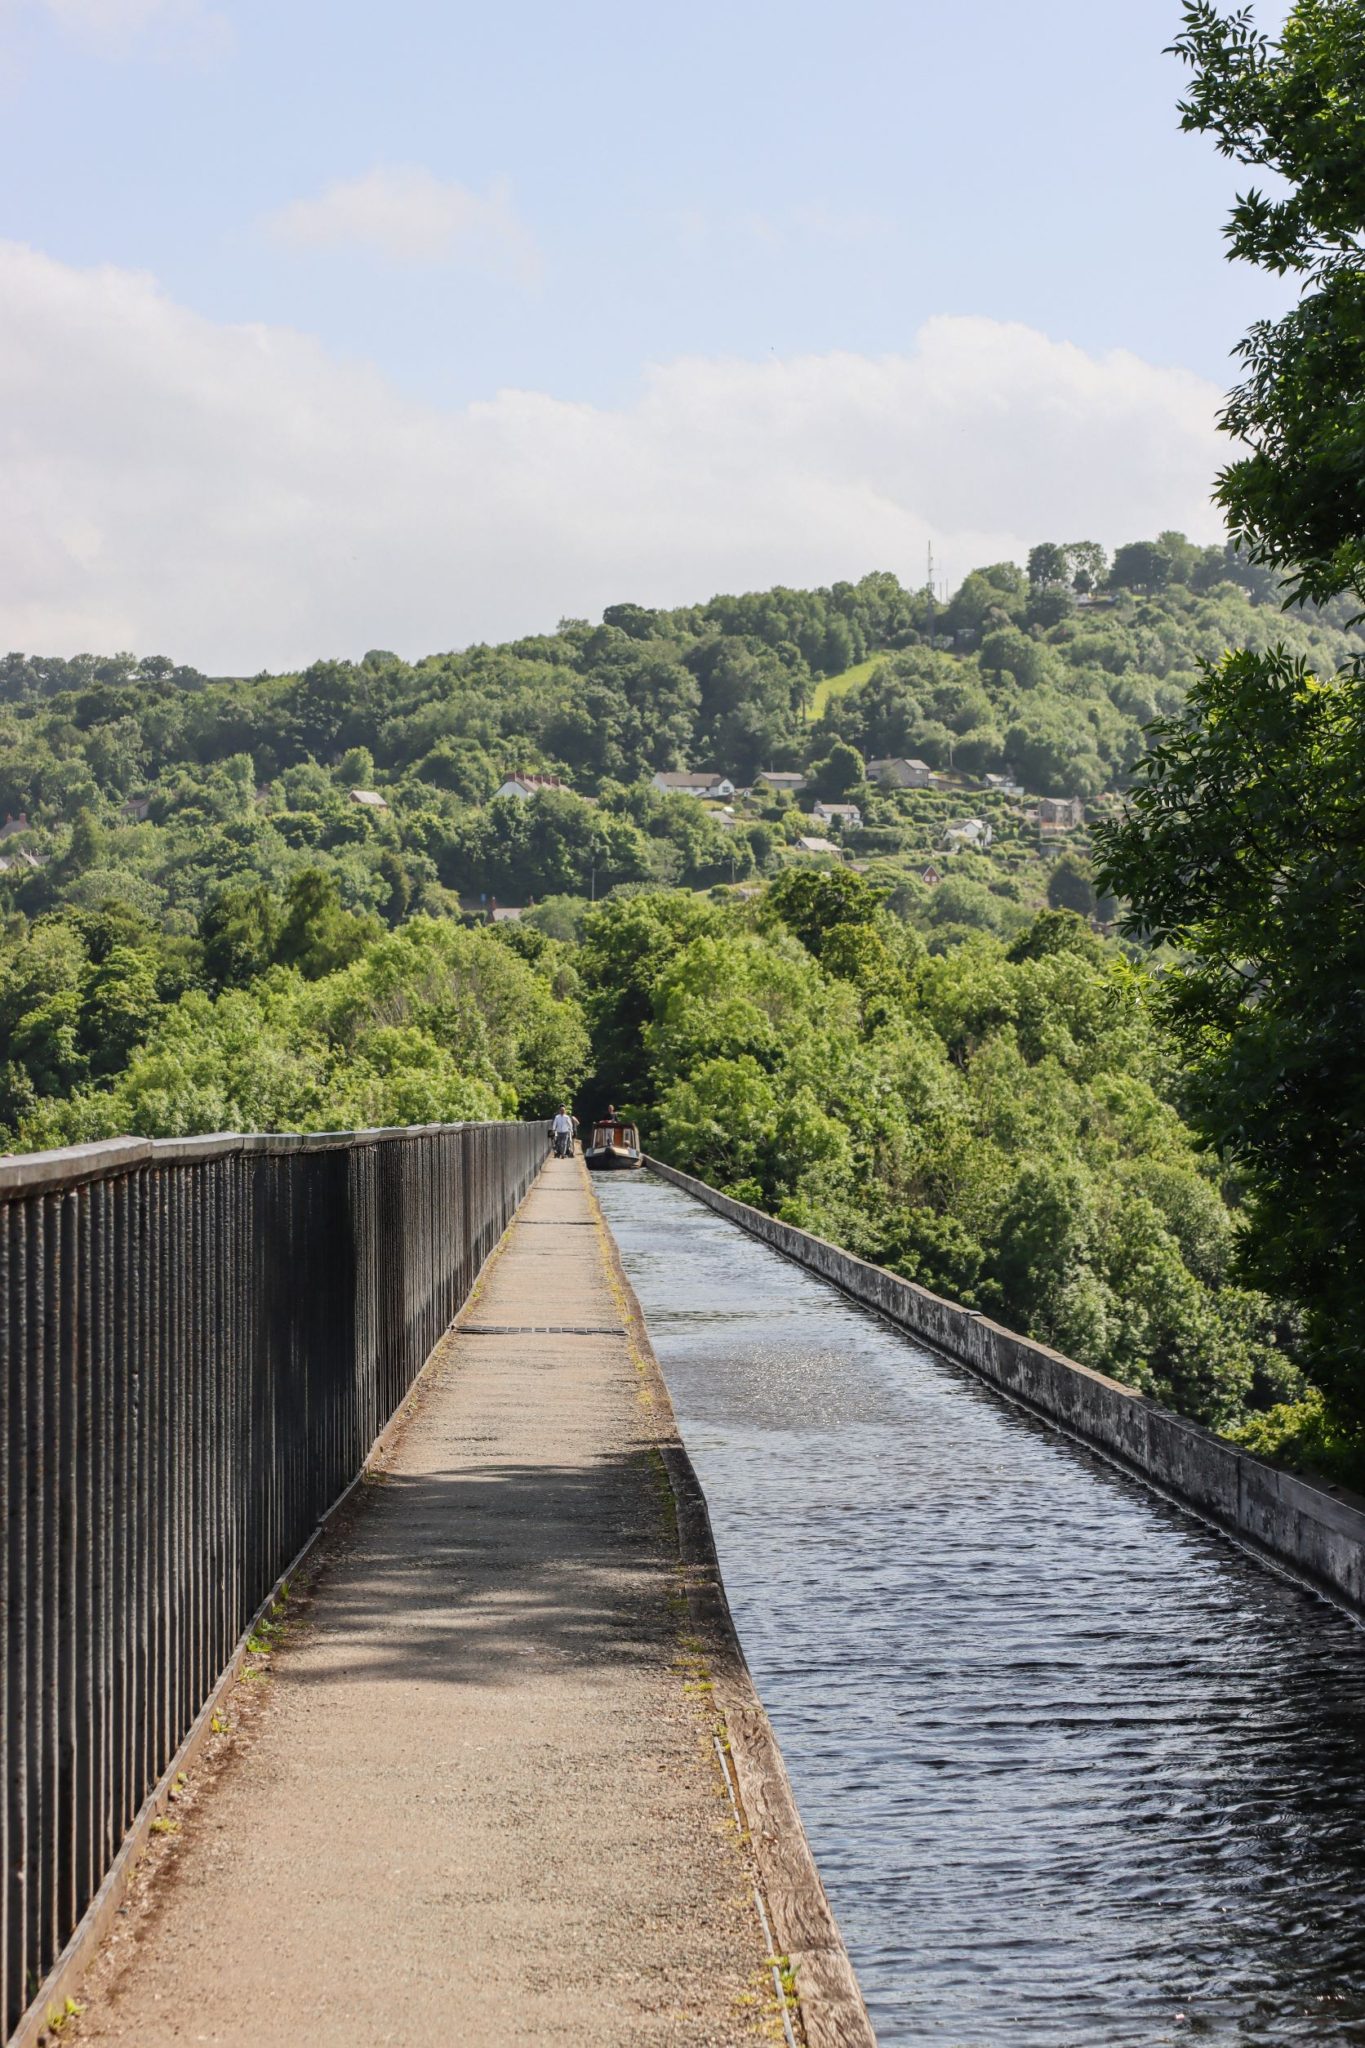 Pontcysyllte Aqueduct, The Best Things to do in North Wales